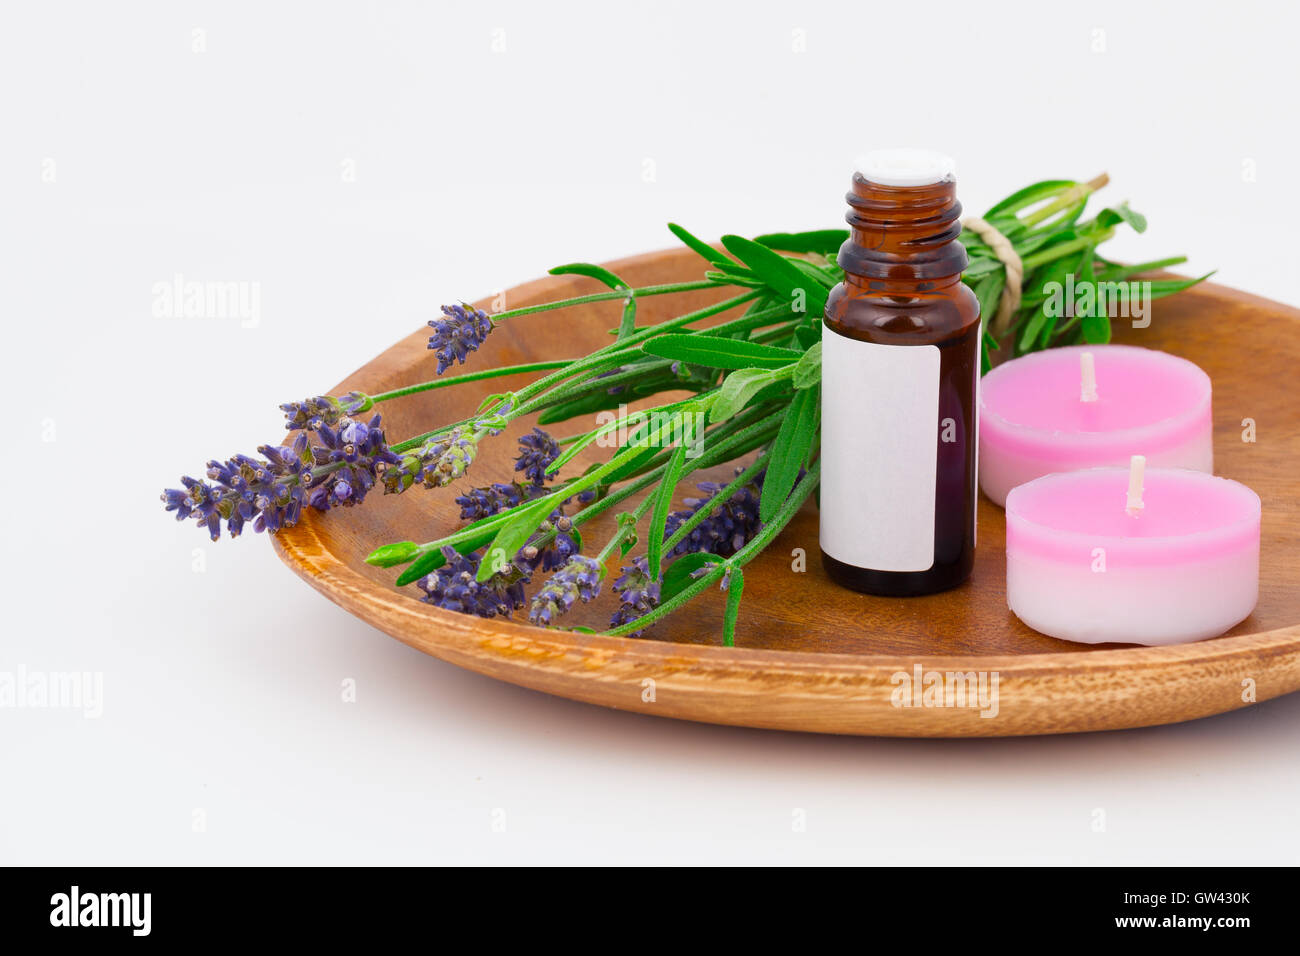 Aromatherapy Lavender oil and lavender flower in the wooden bowl Stock Photo